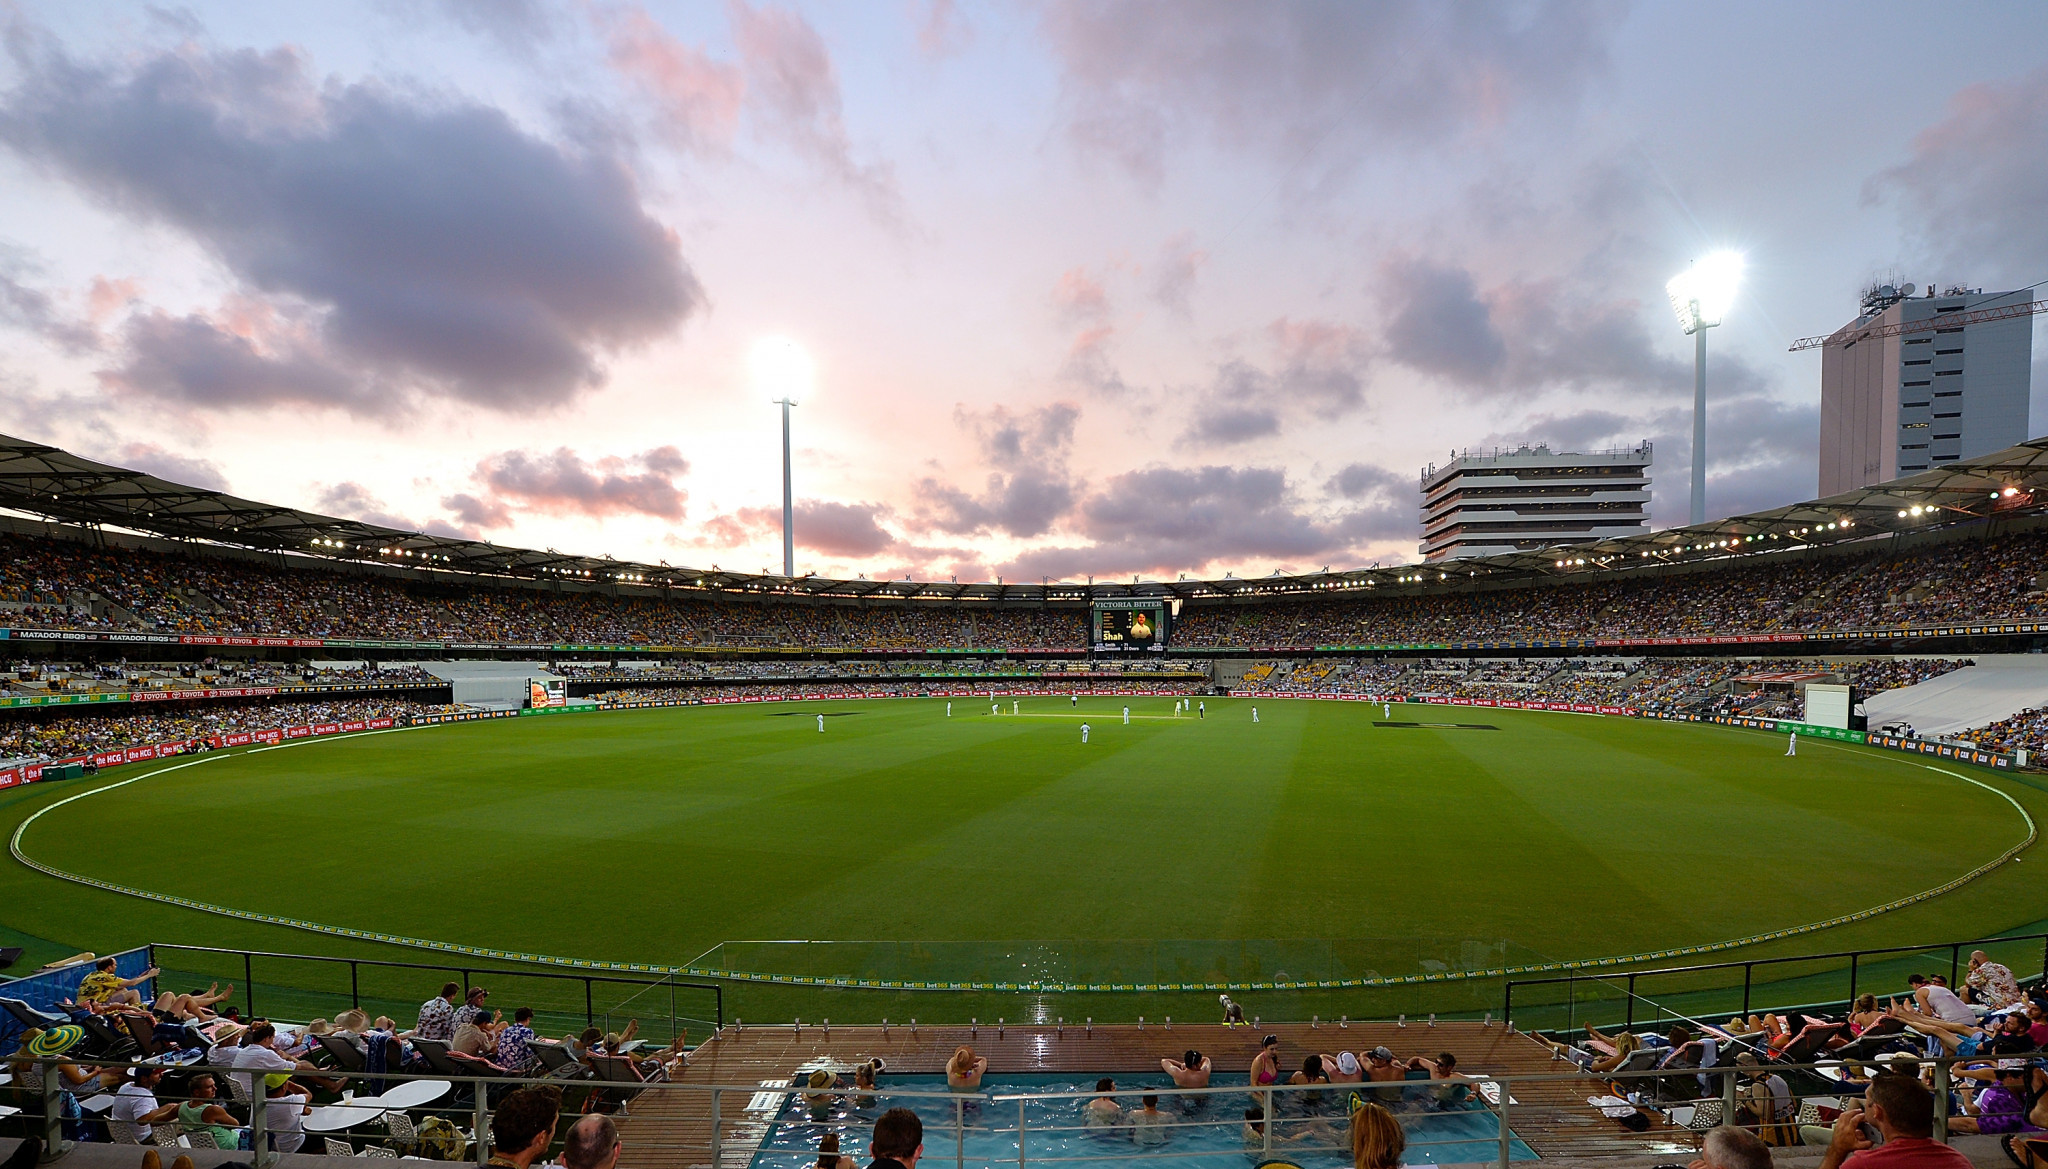 Andrew Liveris claimed Brisbane 2032 projects including the redevelopment of the Gabba would create an 